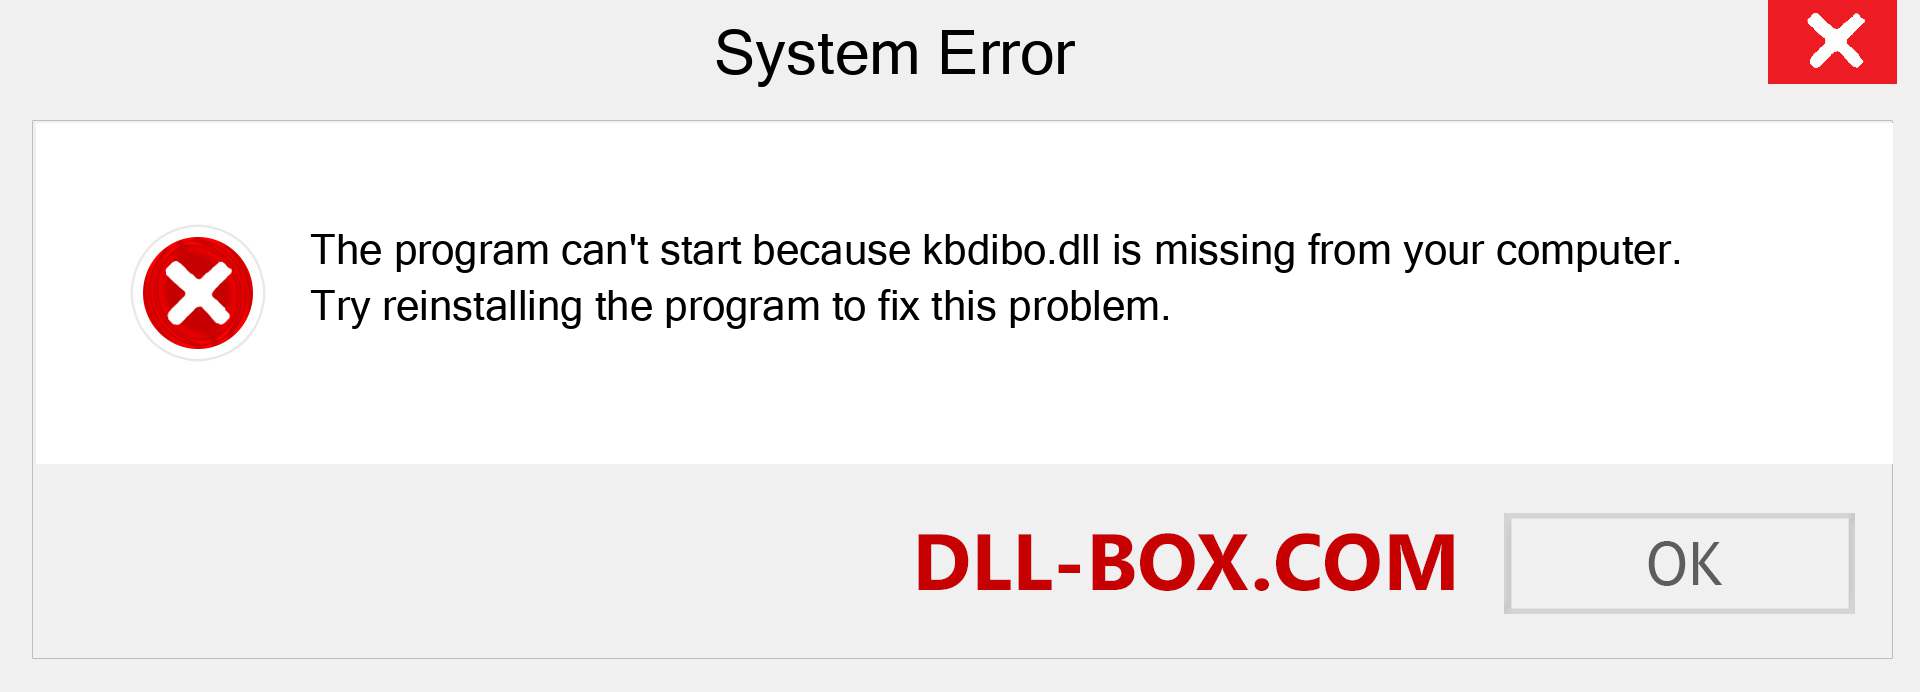  kbdibo.dll file is missing?. Download for Windows 7, 8, 10 - Fix  kbdibo dll Missing Error on Windows, photos, images